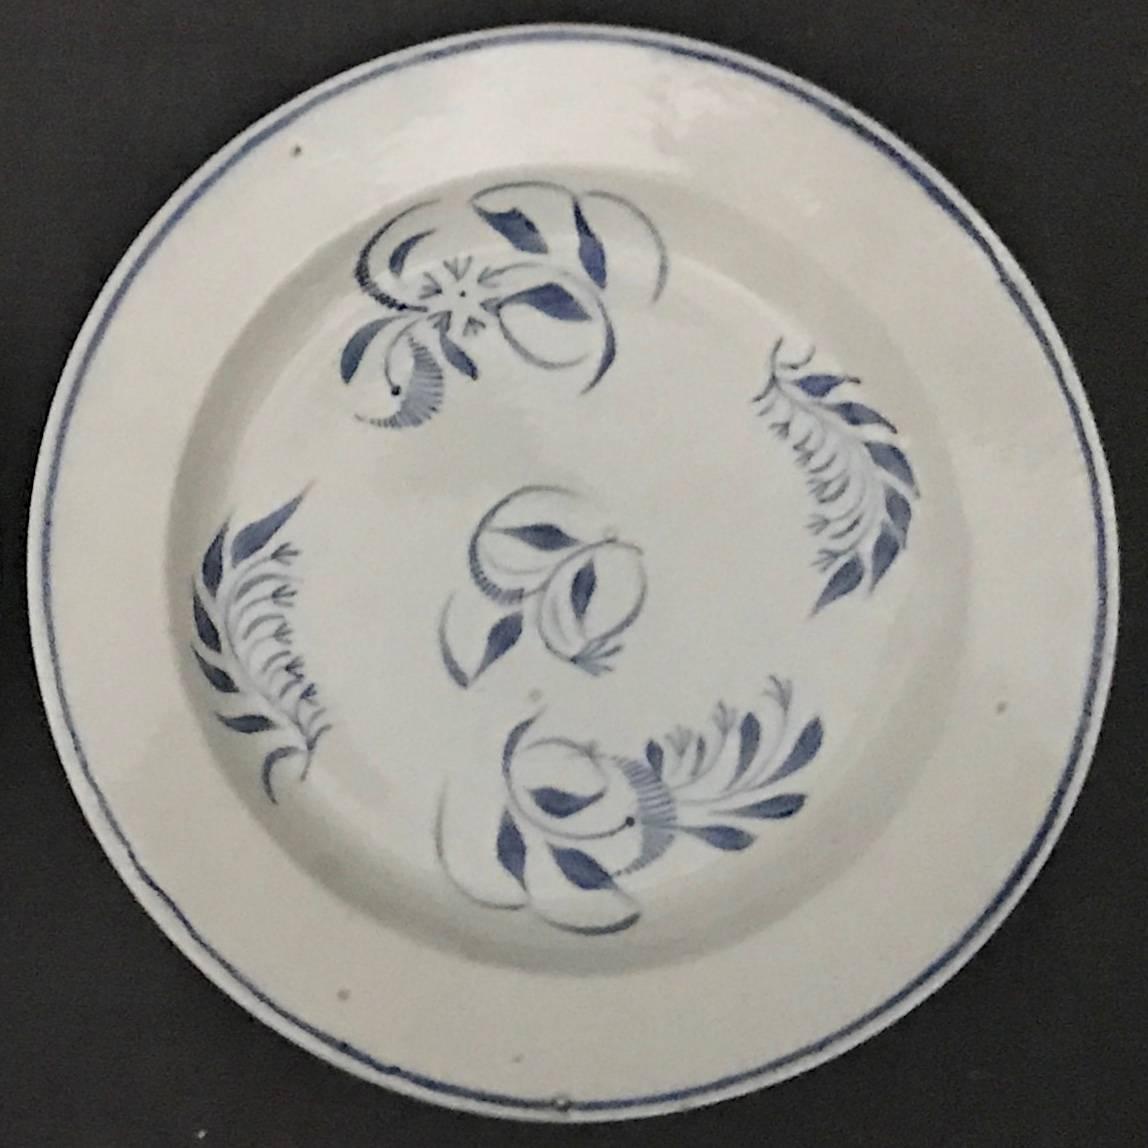 Pair of blue and white French cream-ware plates. Hand-painted blue floral sprigs and border on shallow rimmed cream paste ceramic plates. France, early 19th century. 
Dimensions: 8.63